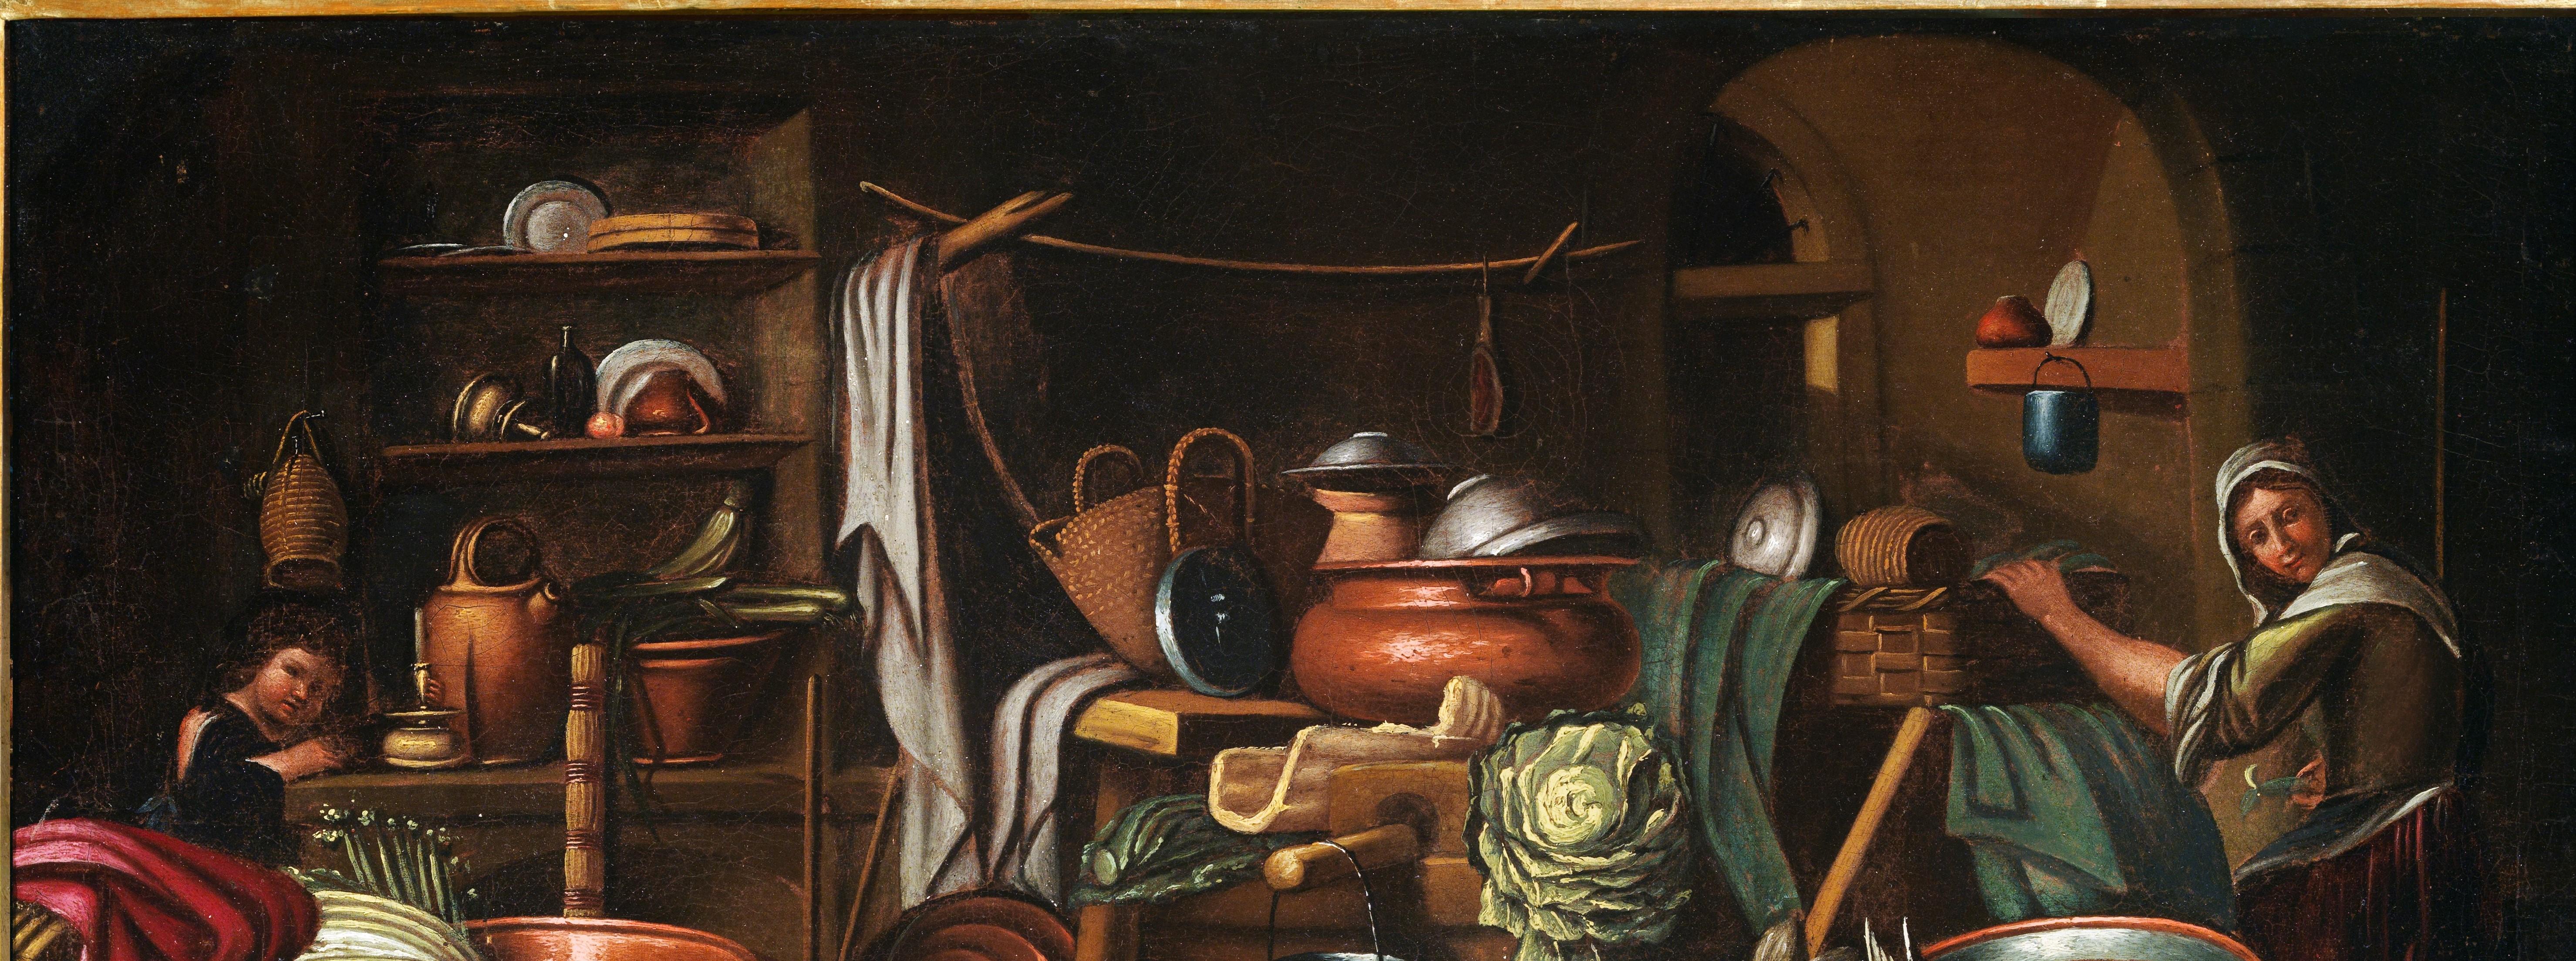 18th Century Kitchen Interiors Antonio Crespi Objects Food Oil on Canvas Brown For Sale 4